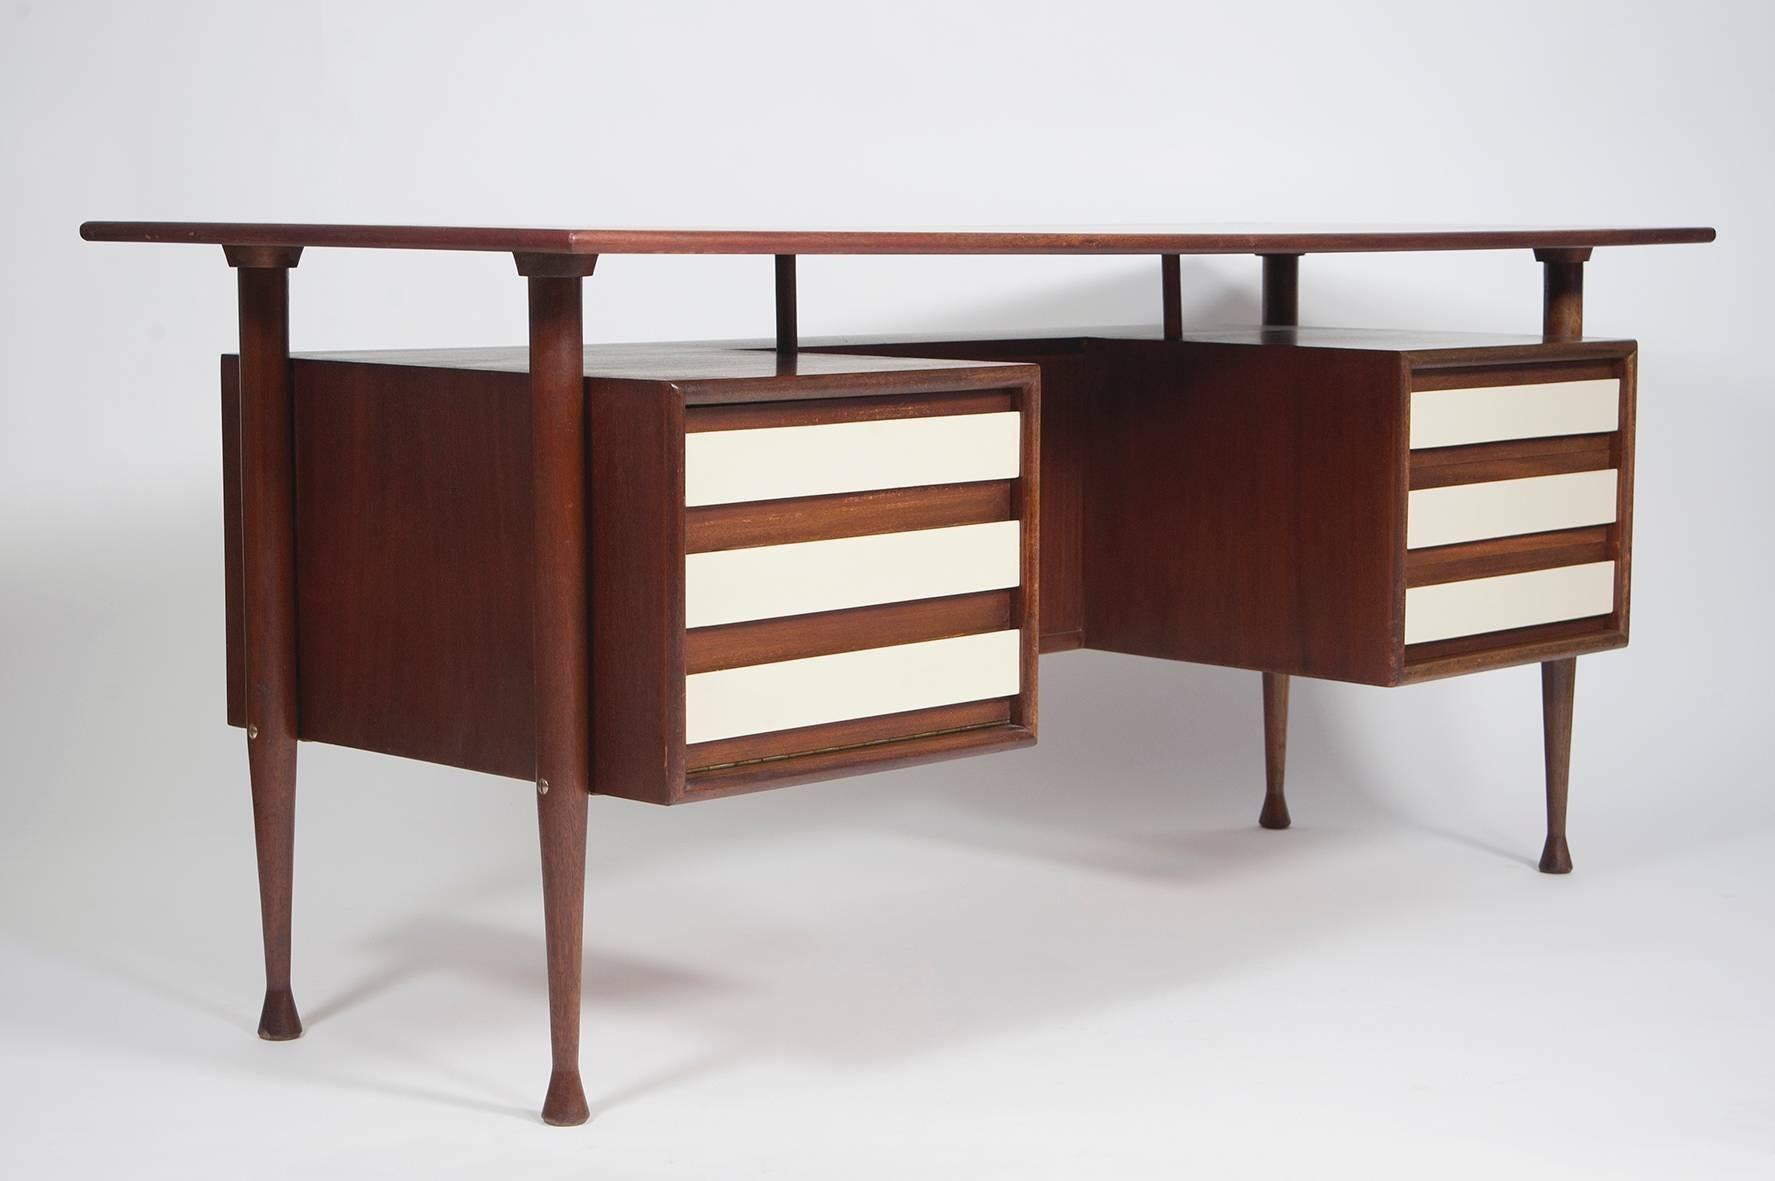 Rare Mid-Century Modern mahogany desk from the German 1960s with organic shaped table leaf, different drawers and bookshelf on the back.